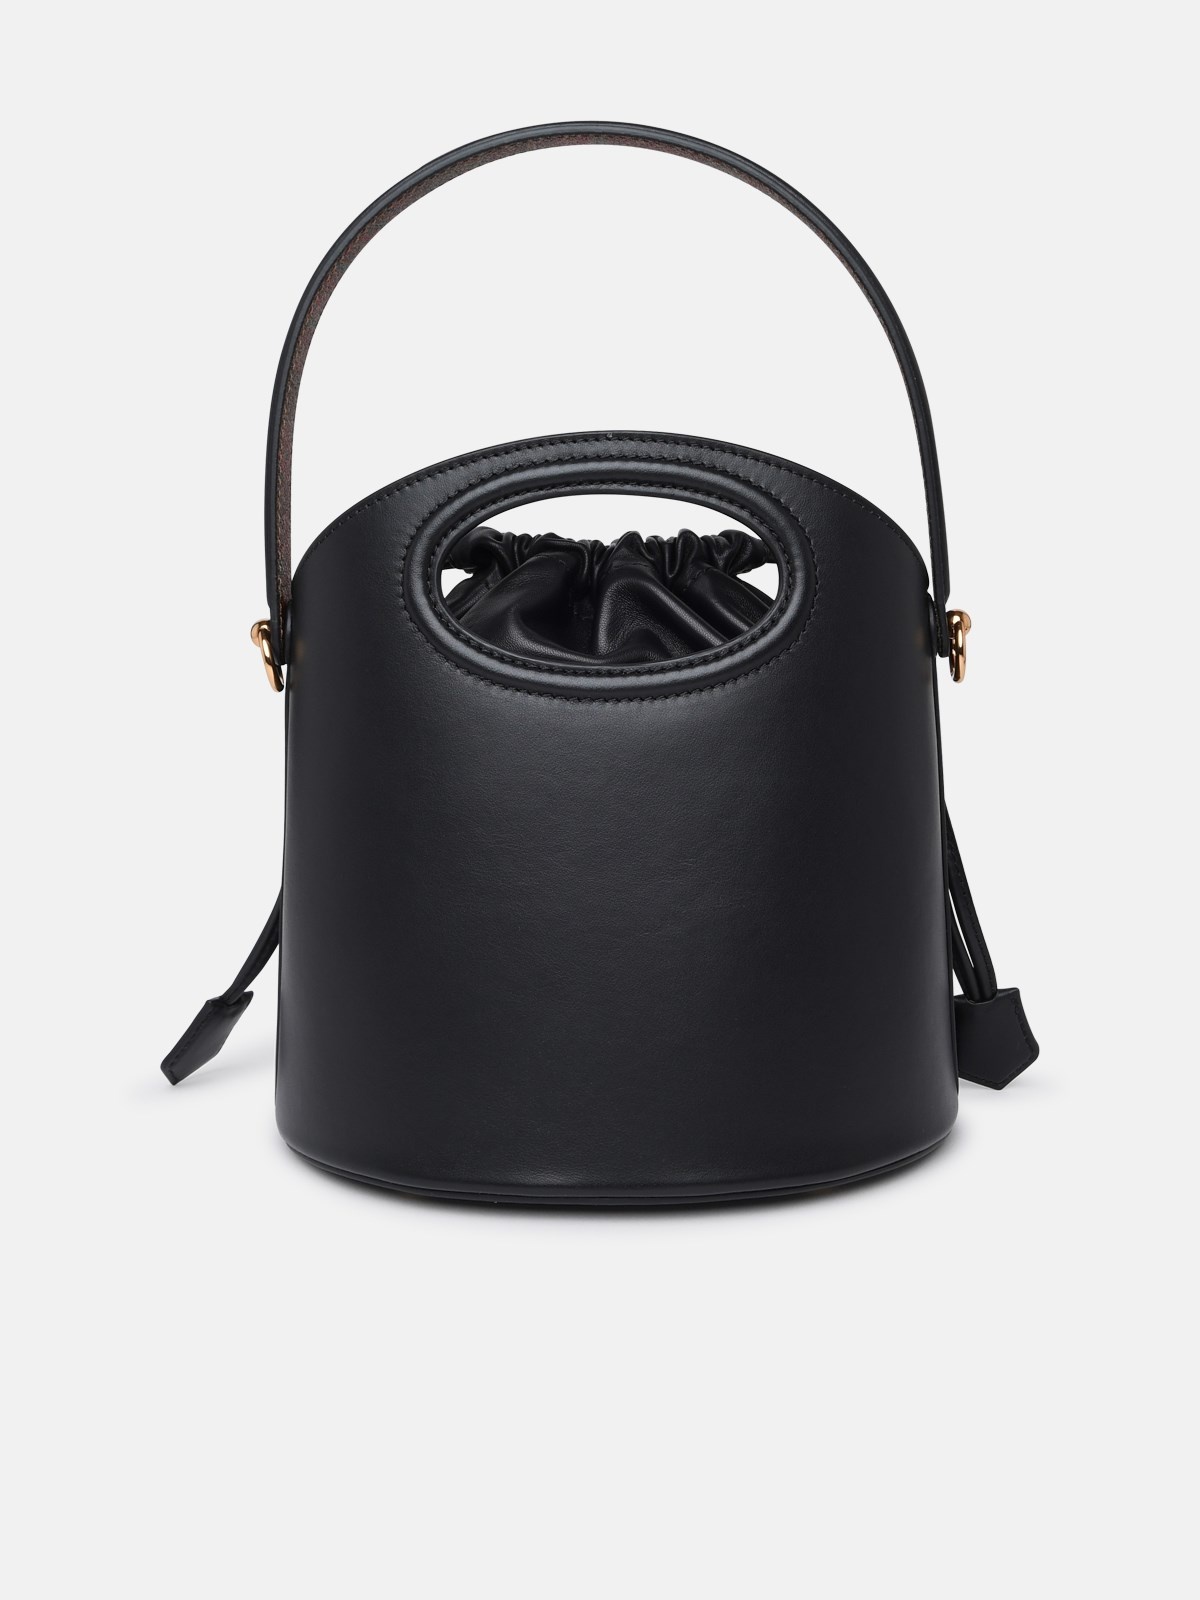 LARGE 'SATURNO' BAG IN BLACK LEATHER - 3